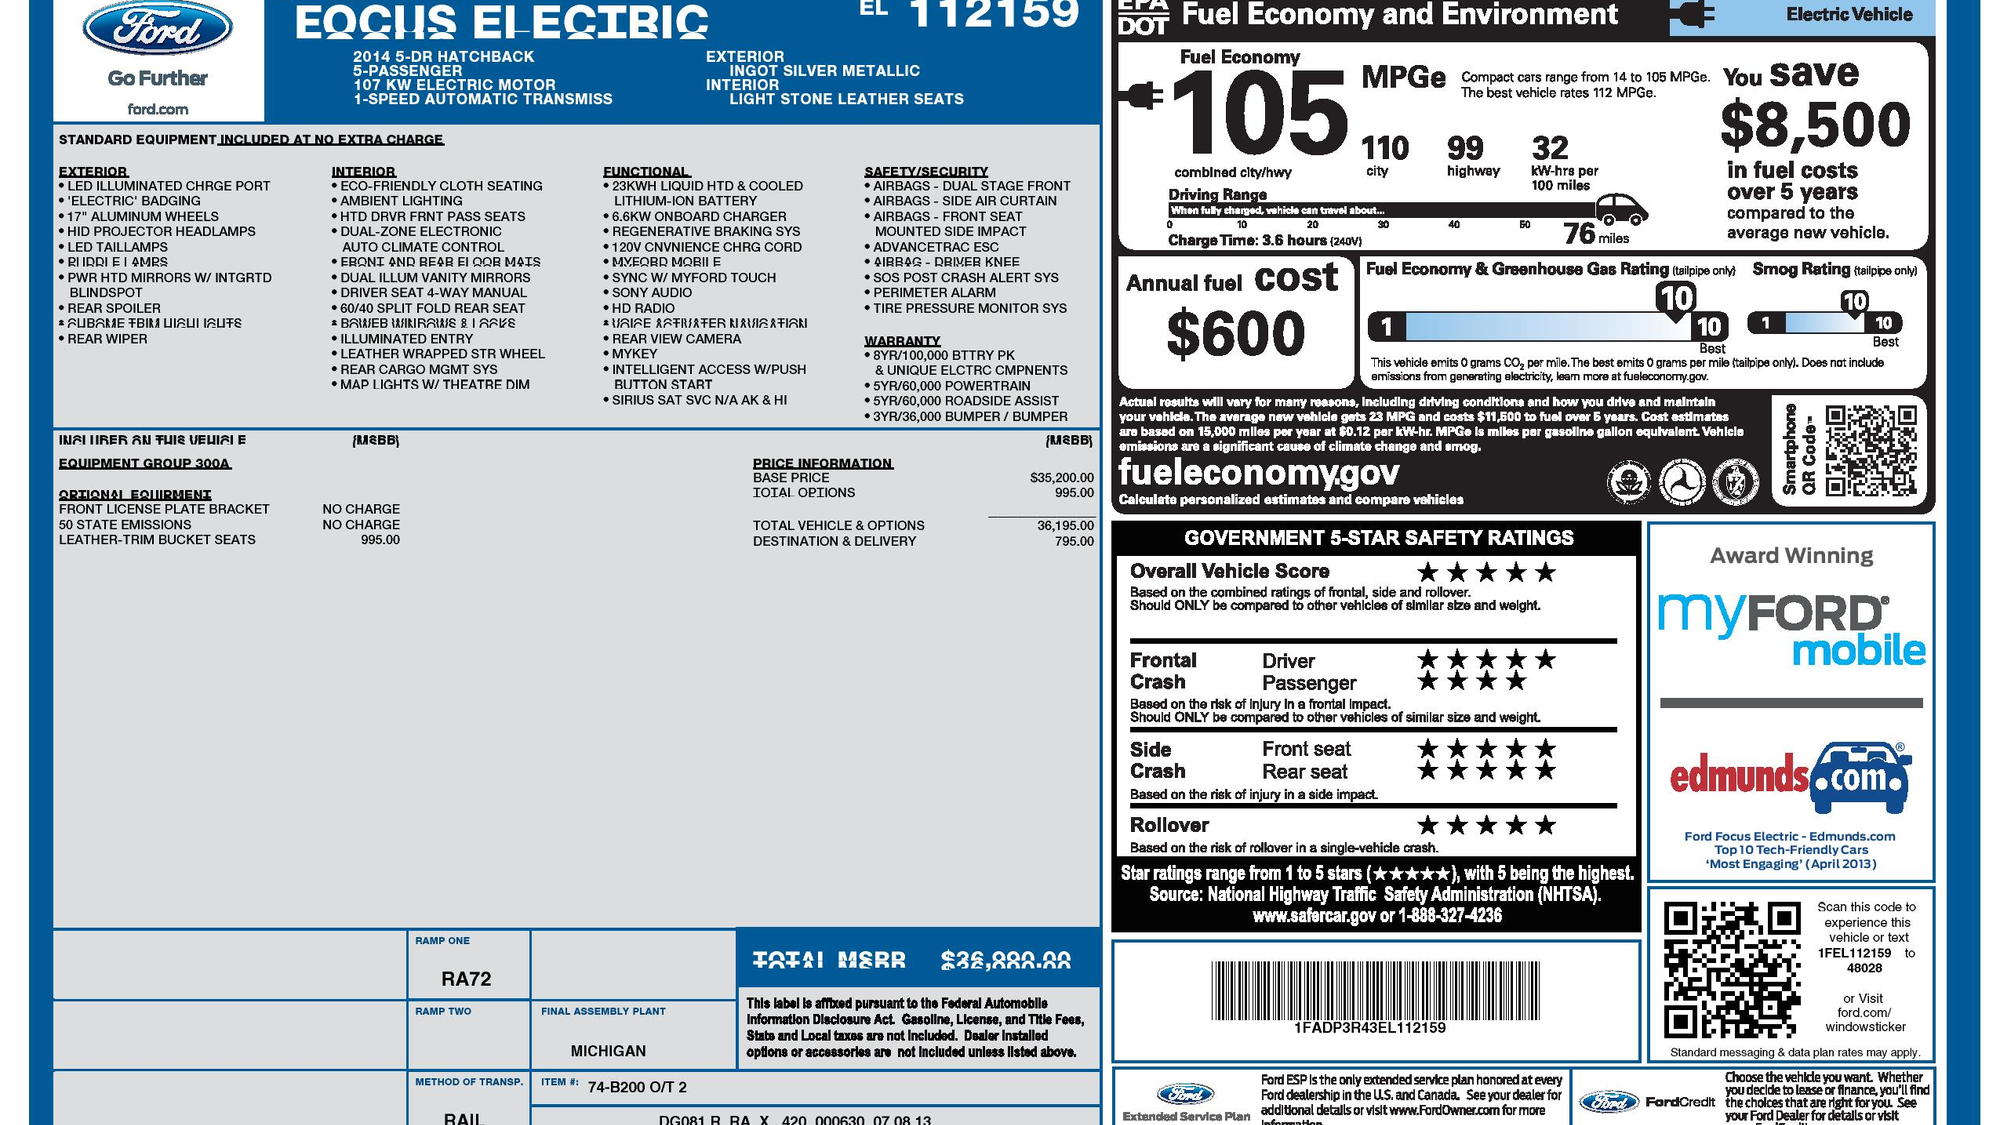 2014 Ford Focus Electric window sticker showing lower price